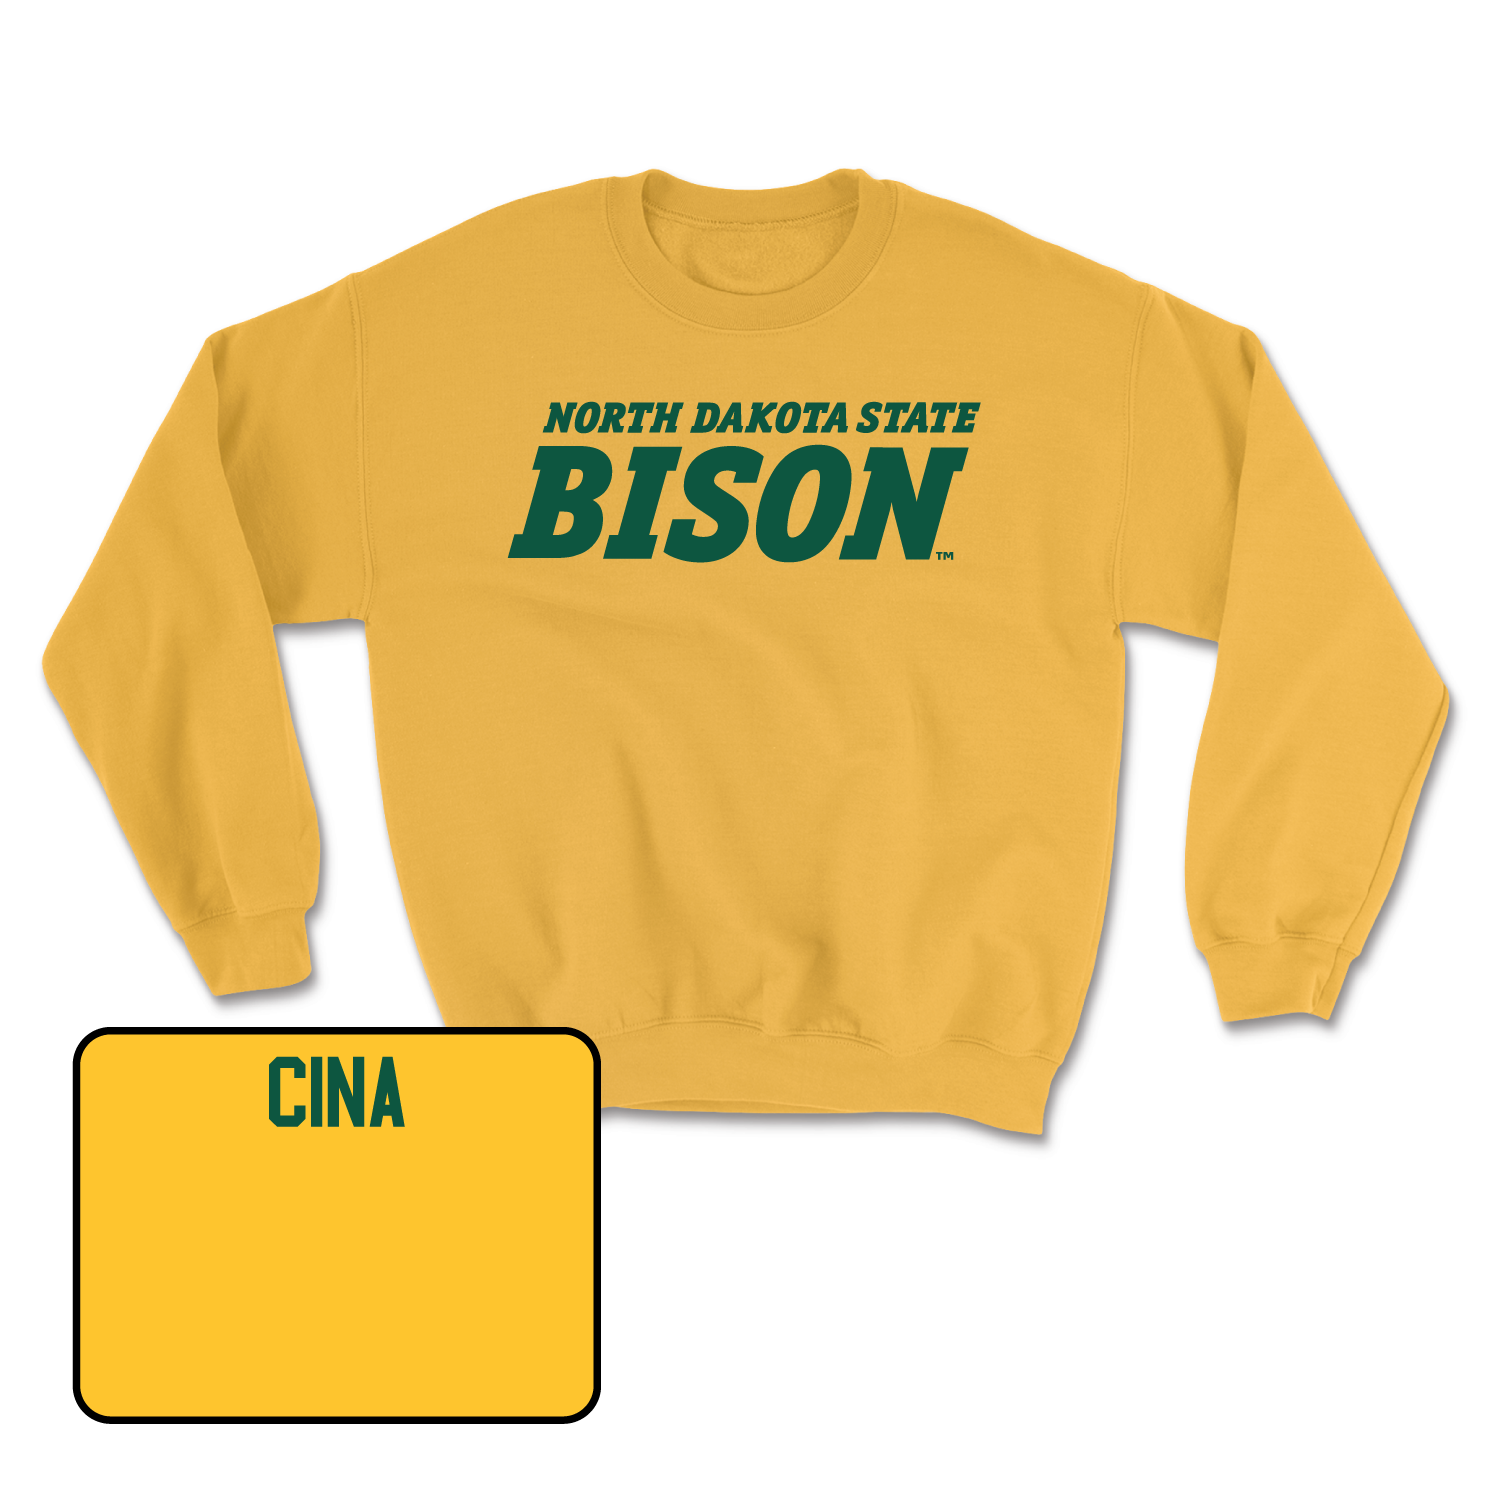 Gold Track & Field Bison Crew Small / Brooke Cina